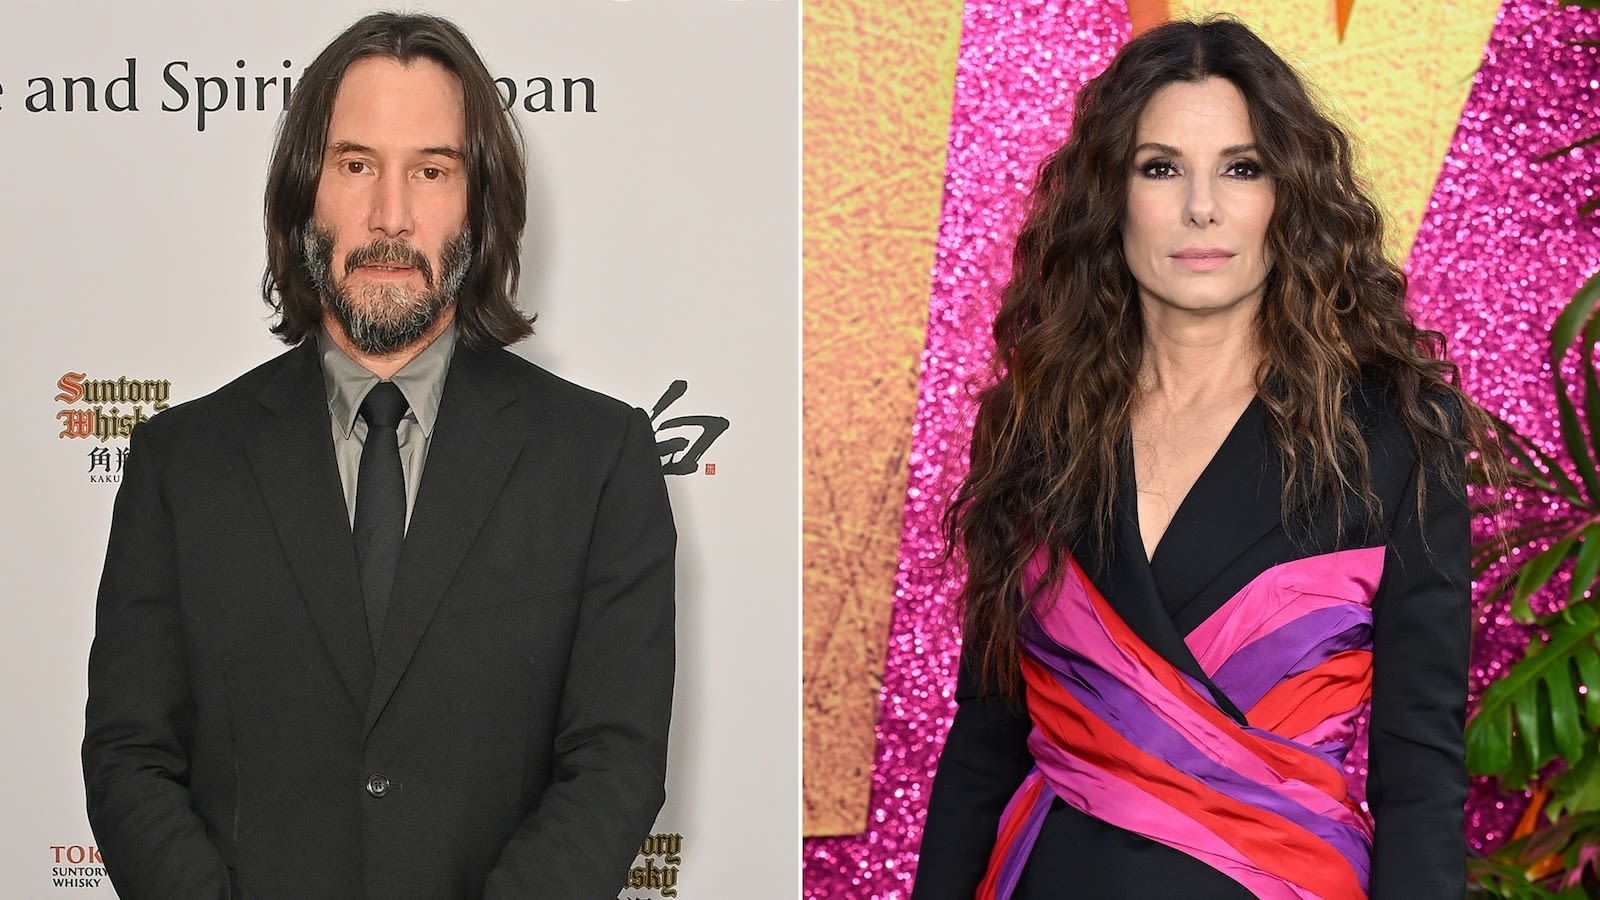 Keanu Reeves wants 'Speed 3' with Sandra Bullock: 'We'd freakin' knock it out of the park'